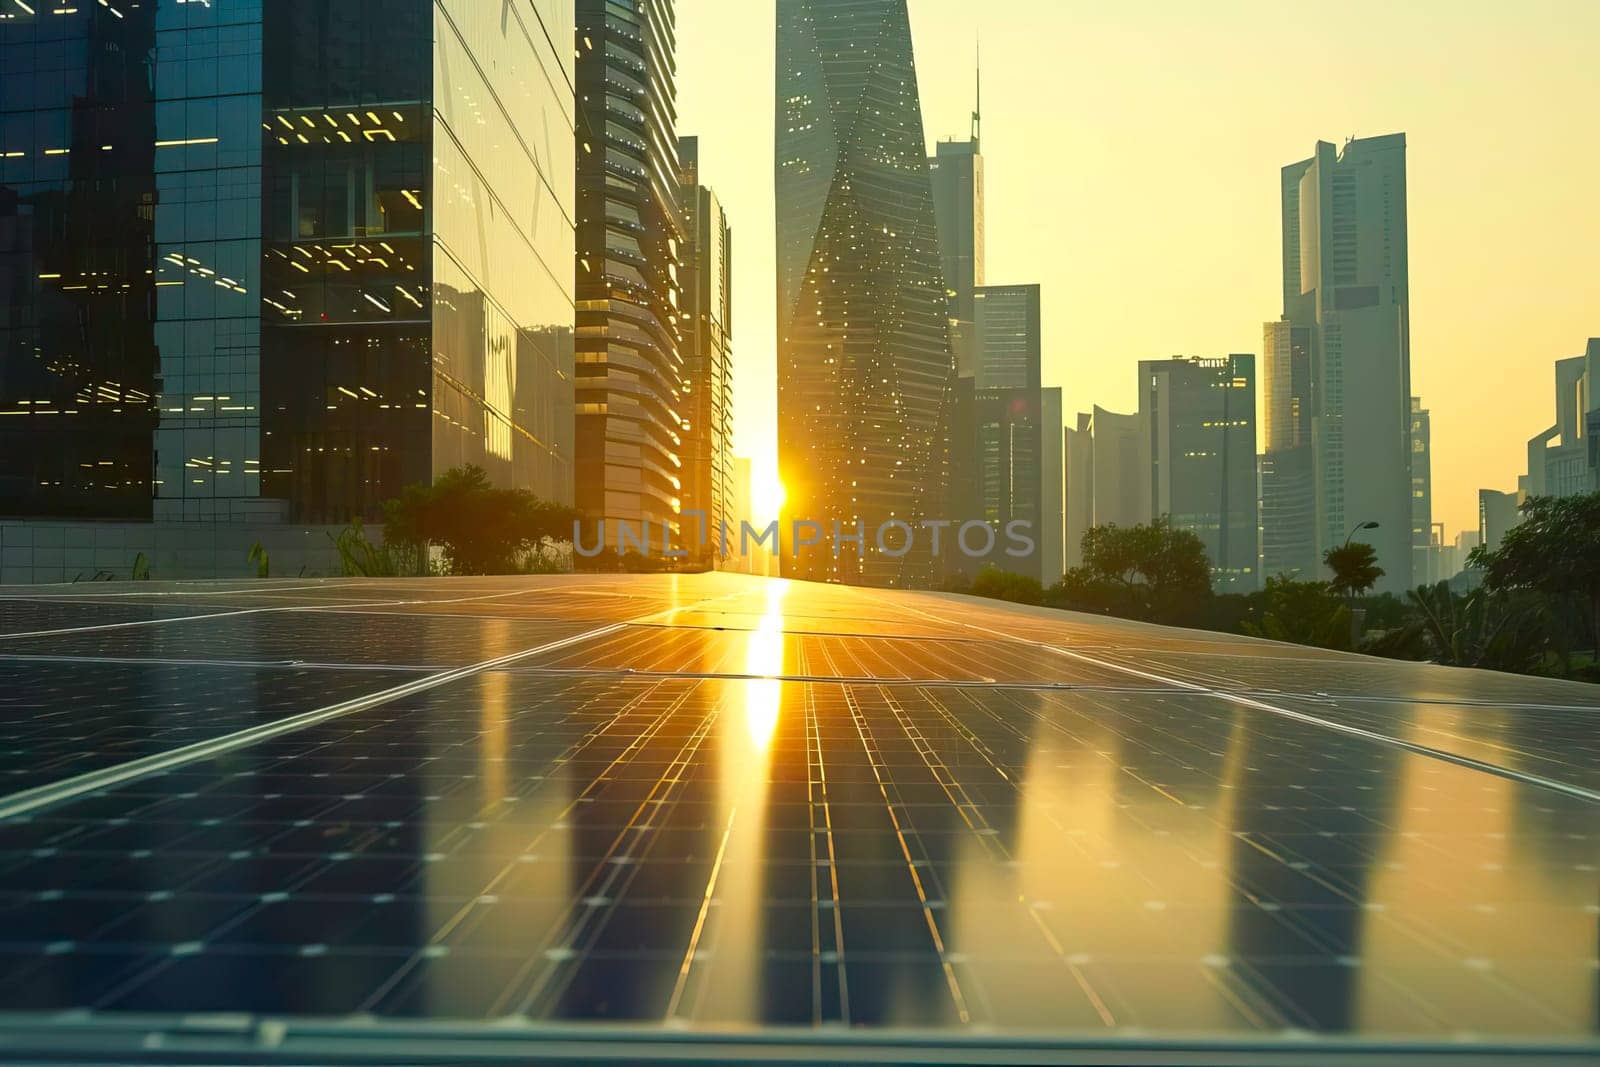 A solar panel capturing energy from the setting sun, against a modern city backdrop.